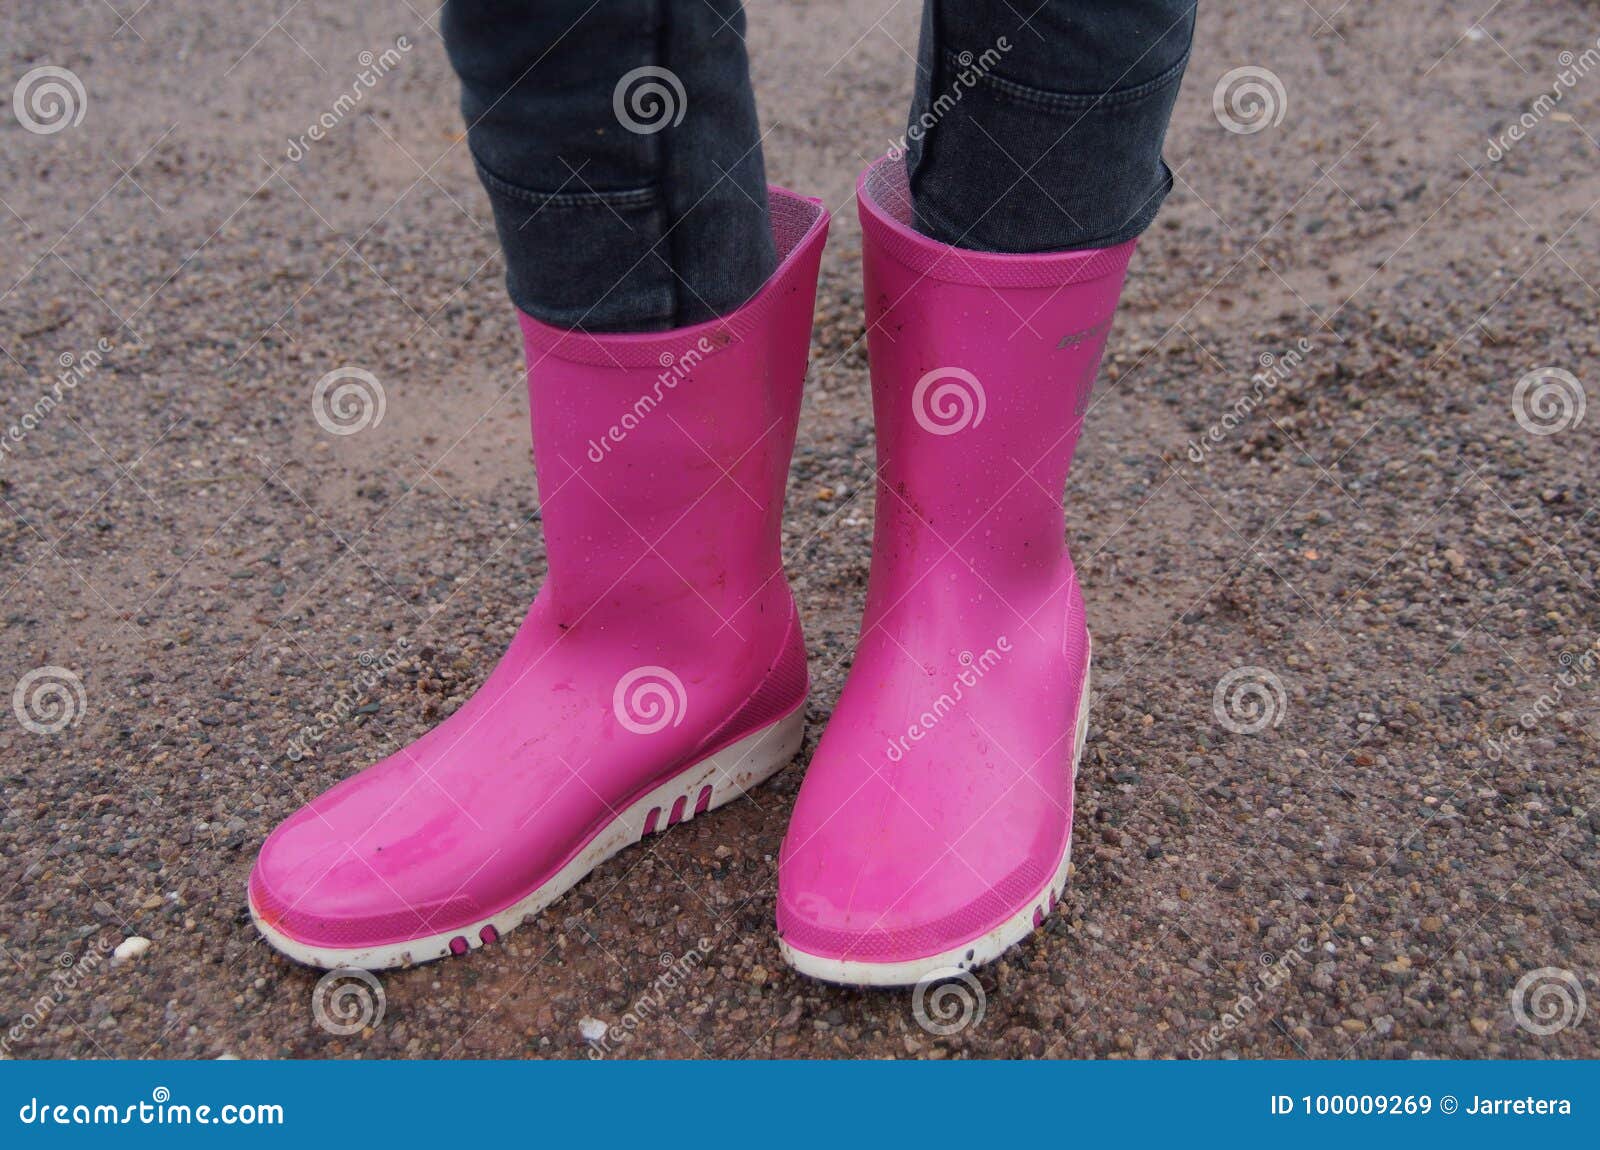 Girl Standing in Pink Rubber Rain Boots Stock Image - Image of ladies ...